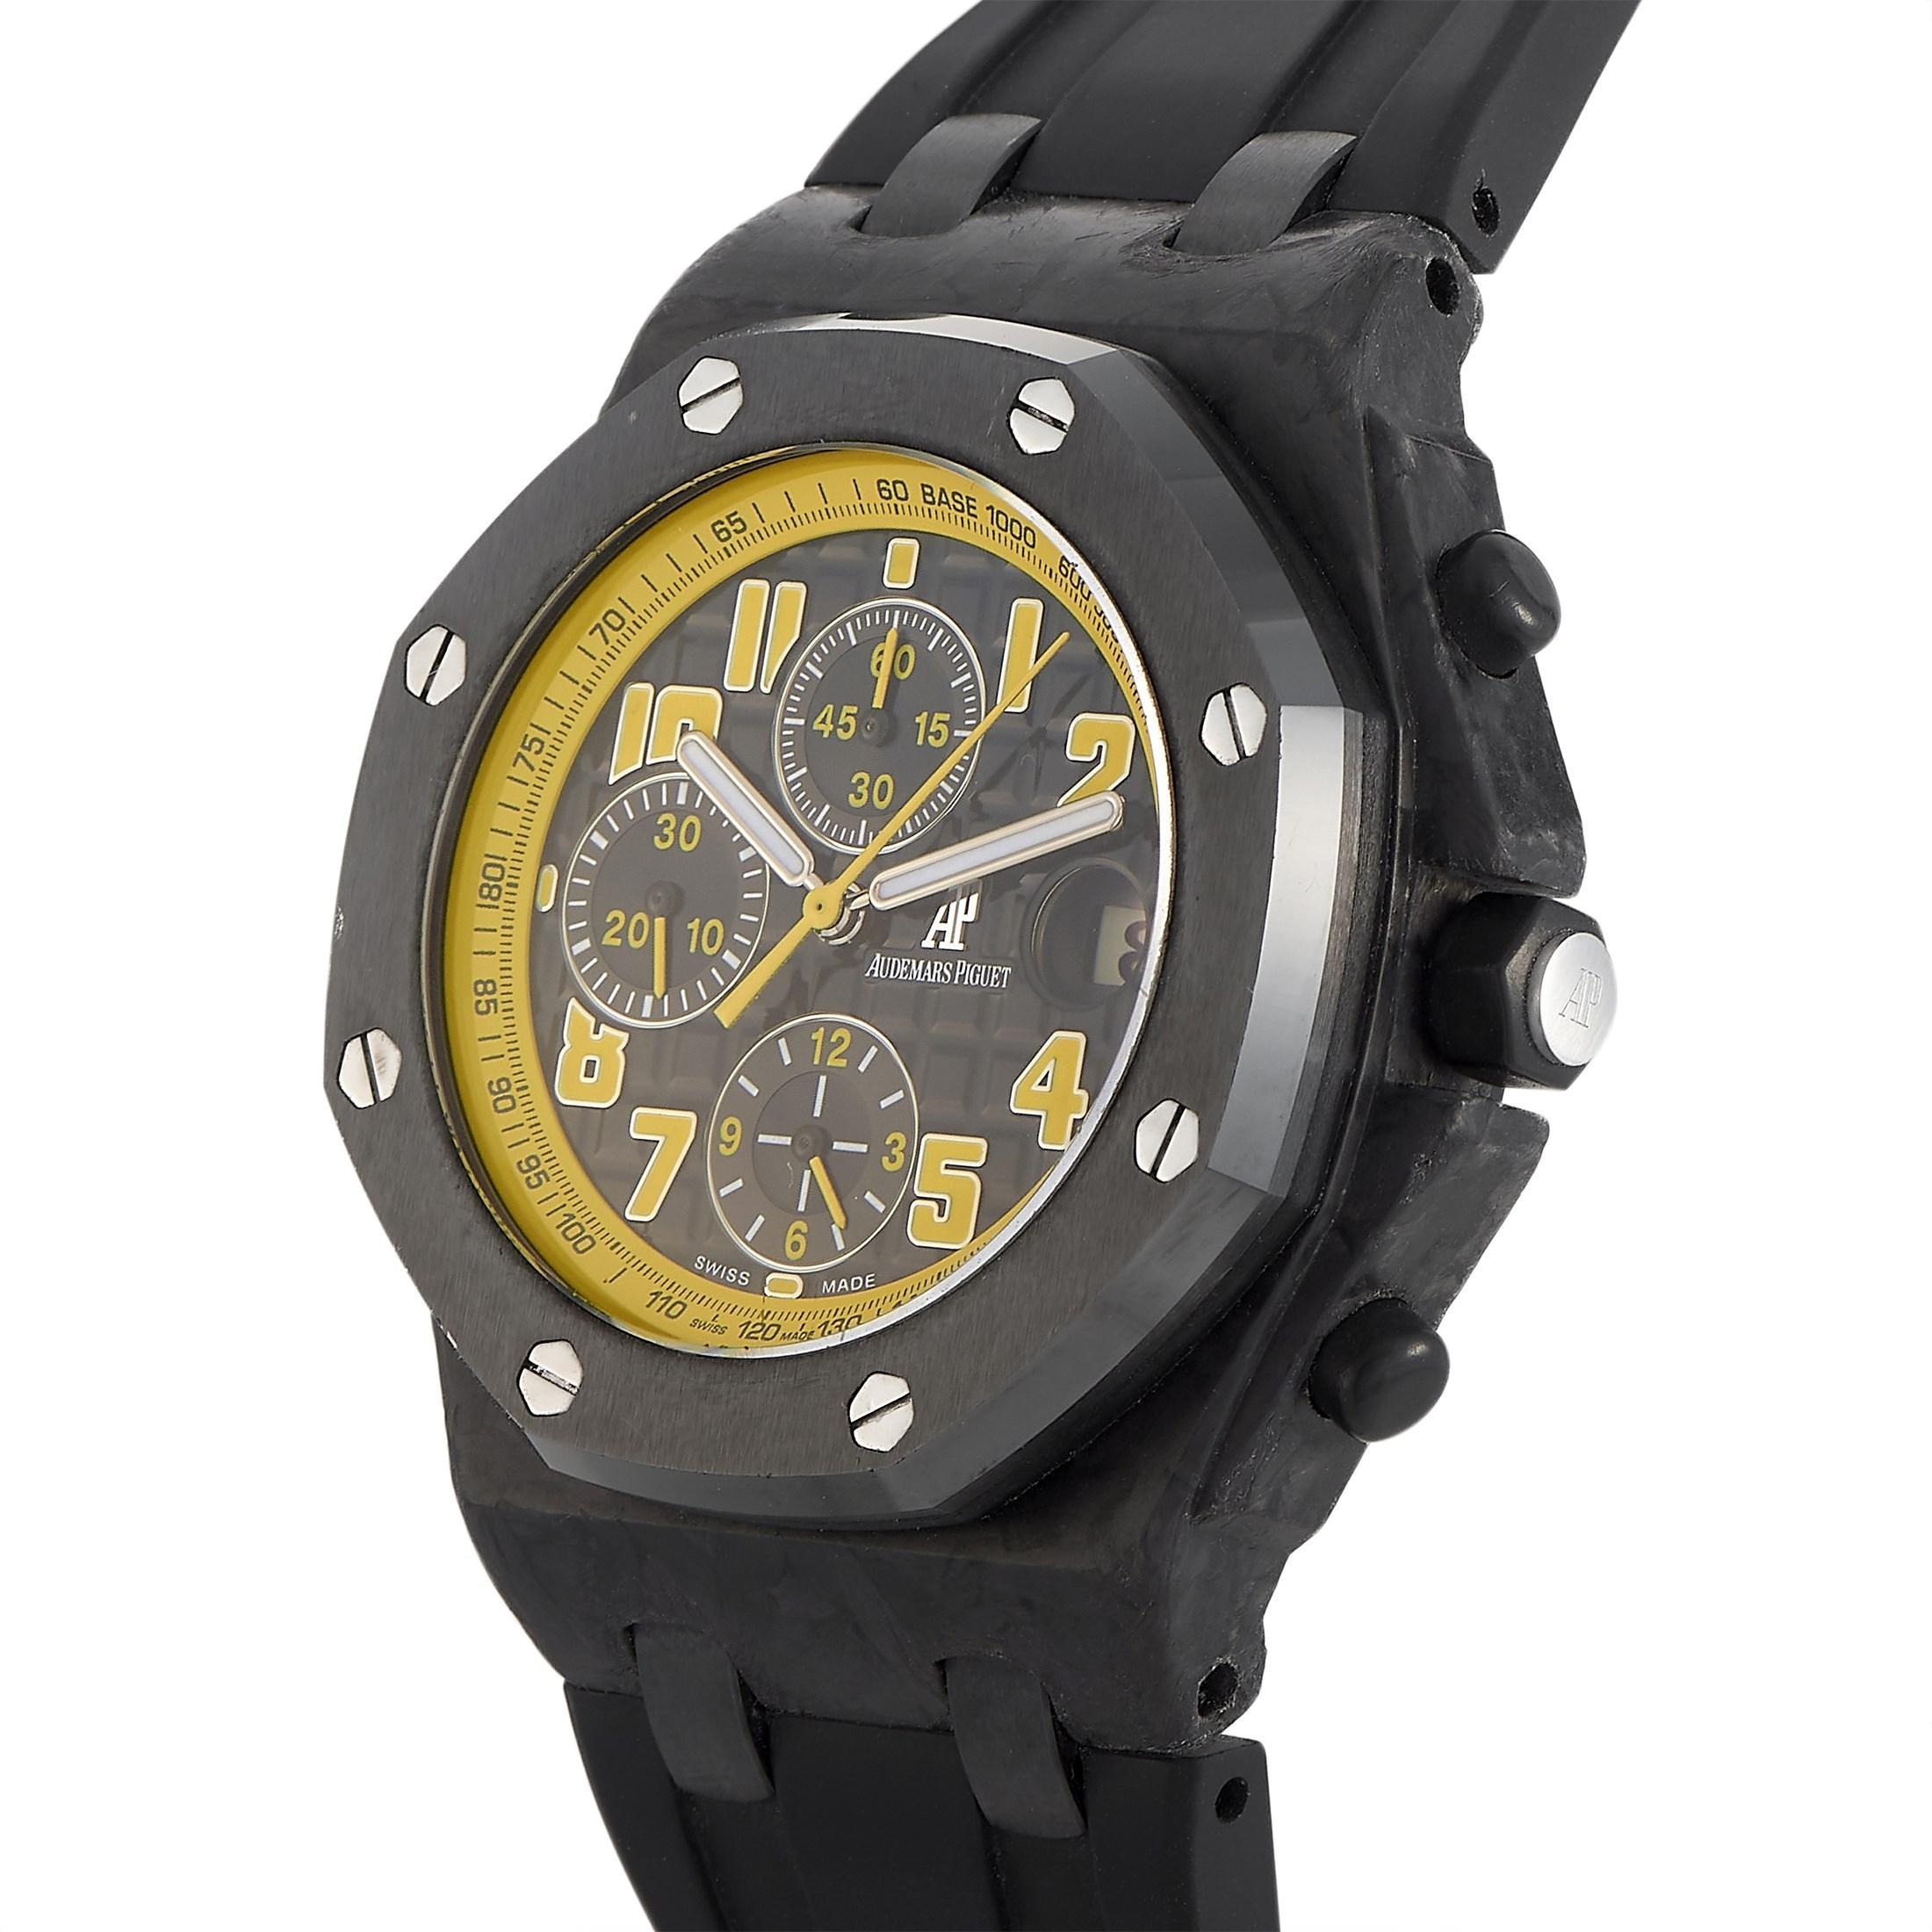 Introduced in 2009, the Audemars Piguet Royal Oak Offshore Chronograph Men's Watch 26176FO was nicknamed Bumblebee as it features a black-and-yellow color palette. Its case is made of forged carbon while the iconic octagonal AP bezel is in black